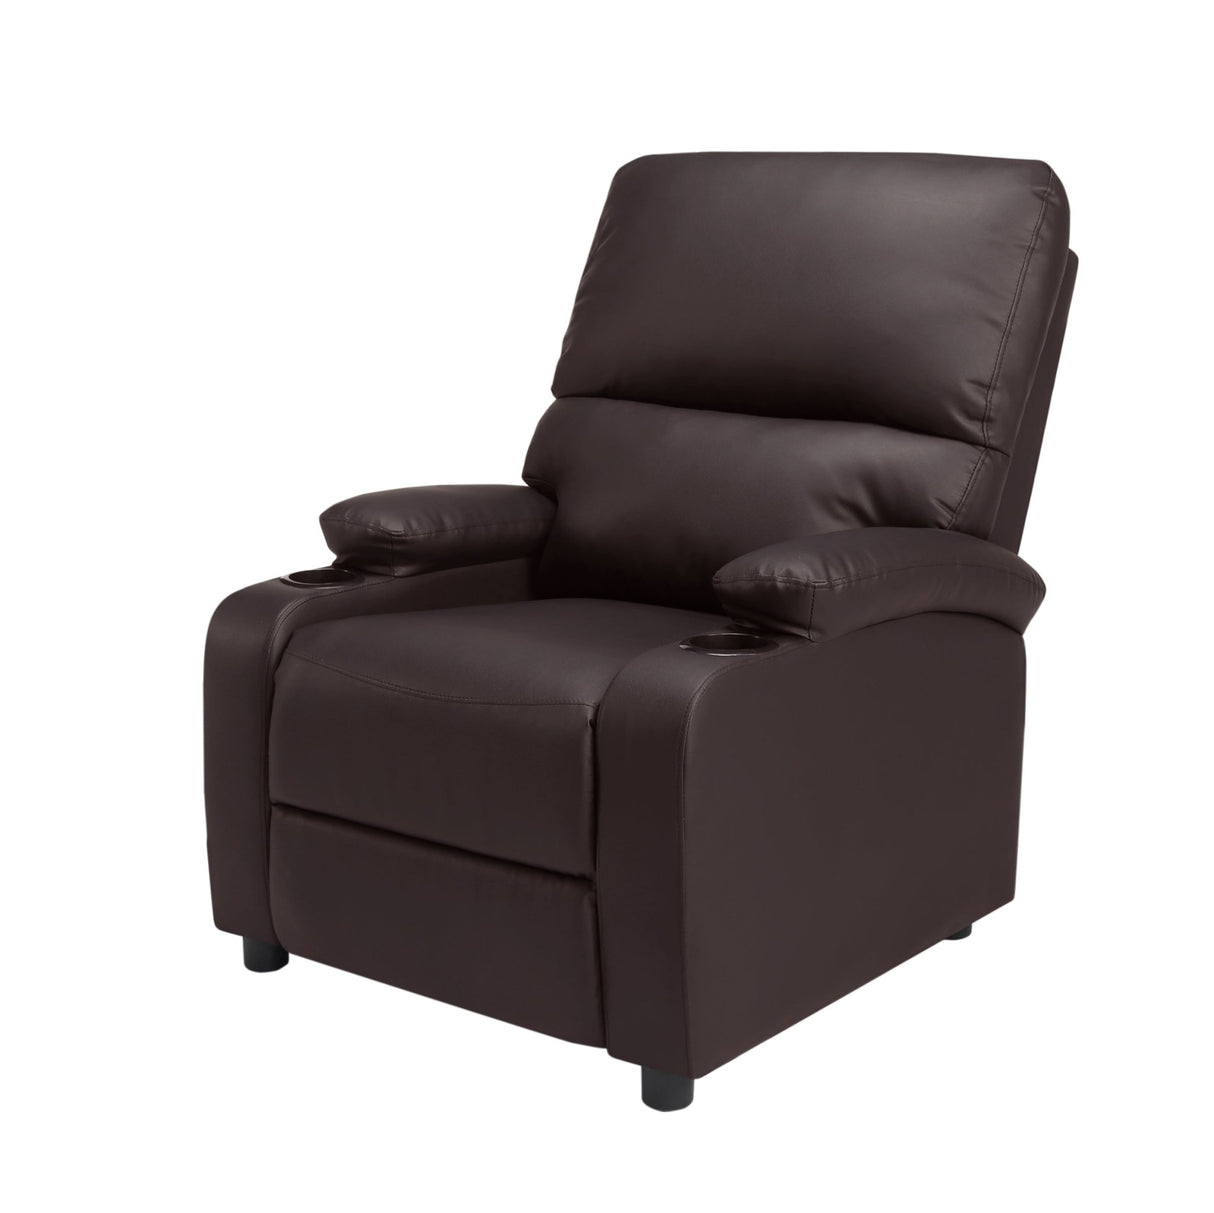 31.5” Faux leather reclining chair Brown Pu - Home Elegance USA